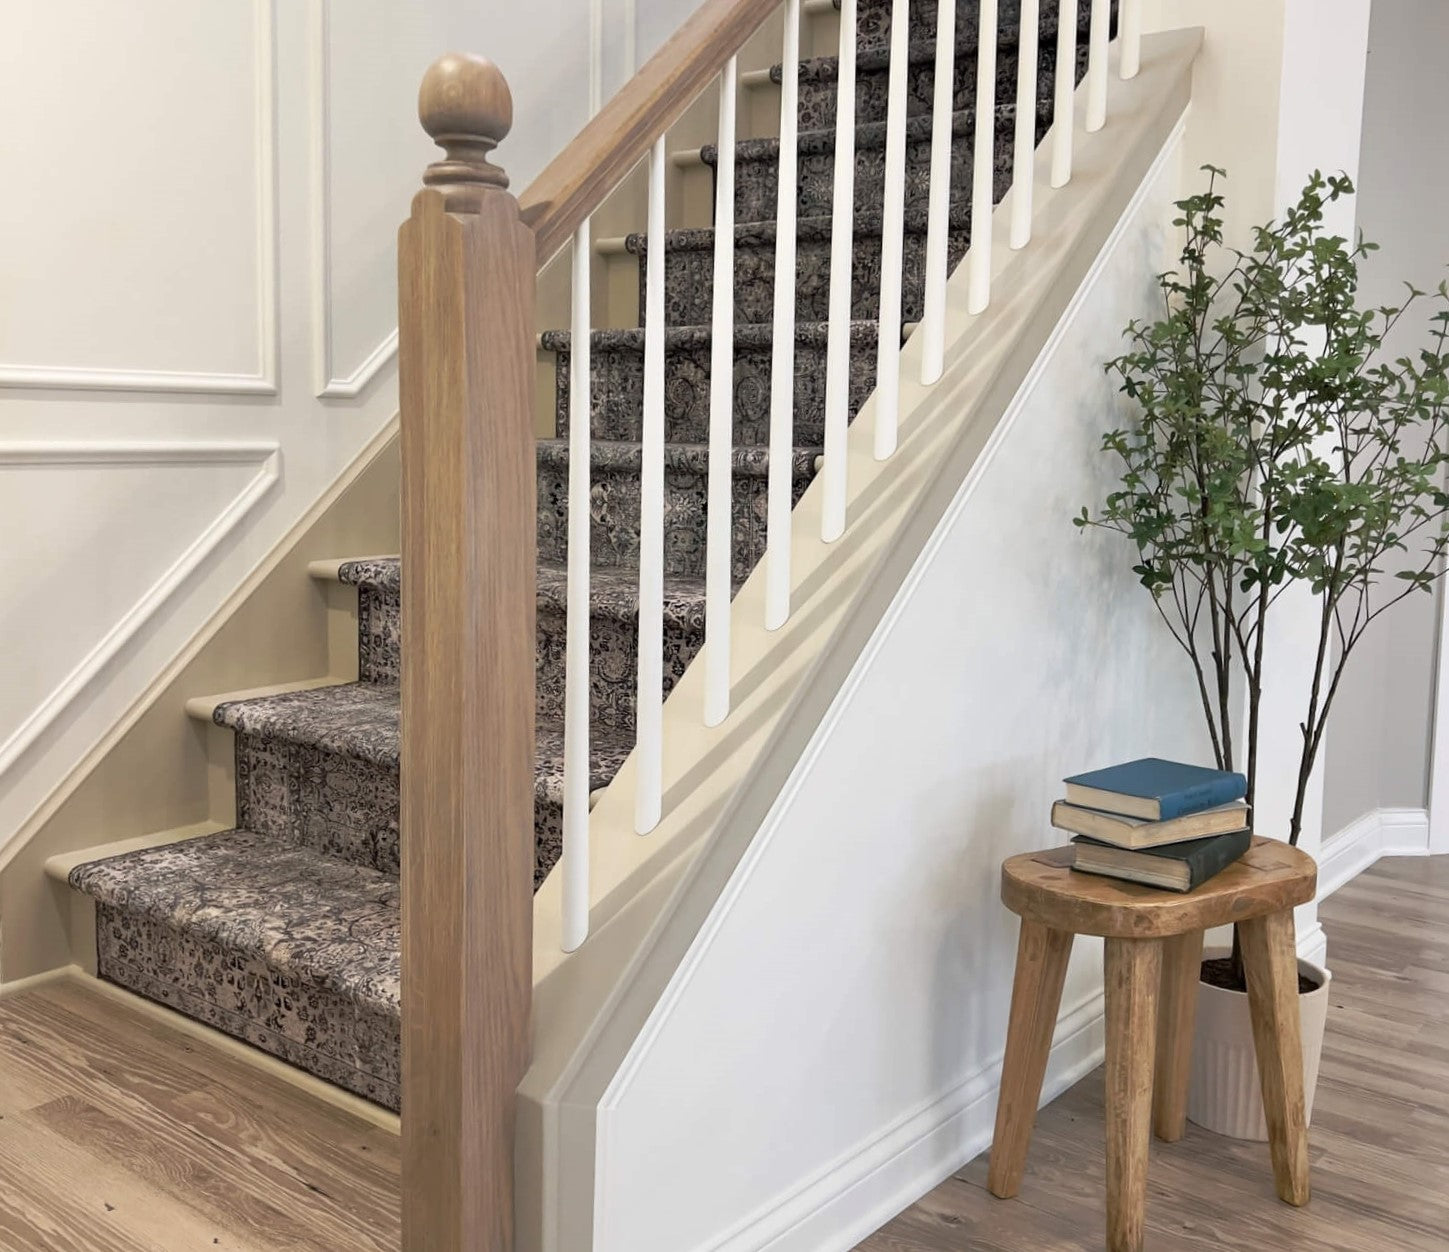 White oak stair railing complete with a stair post and rounded finial. Also pictured is a small vintage stool and potted tree.